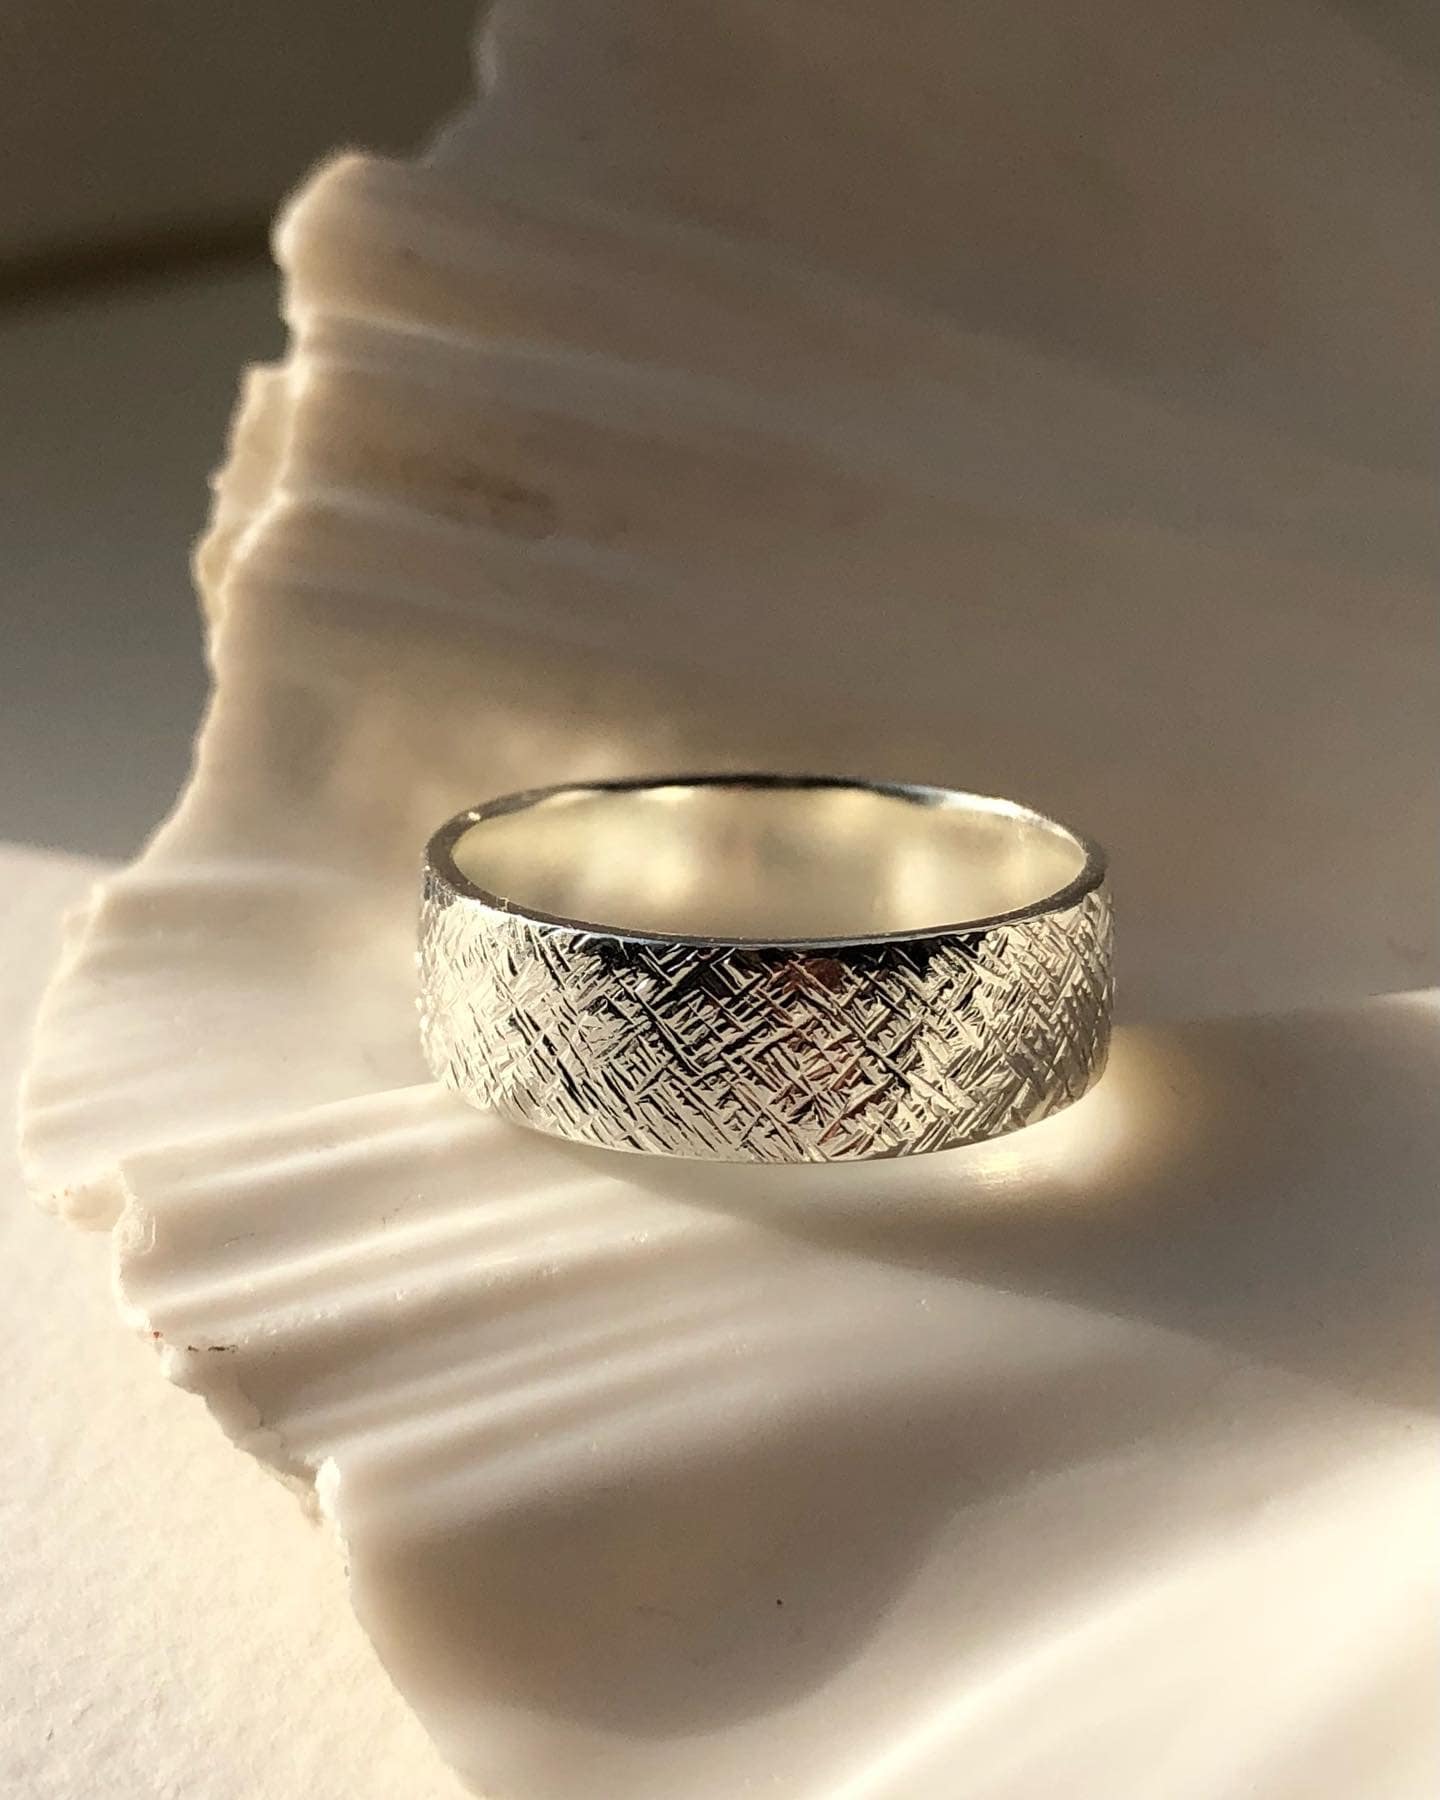 Recycled Silver Wide Textured Ring - Alternative Wedding Band Sterling Silver Jewellery